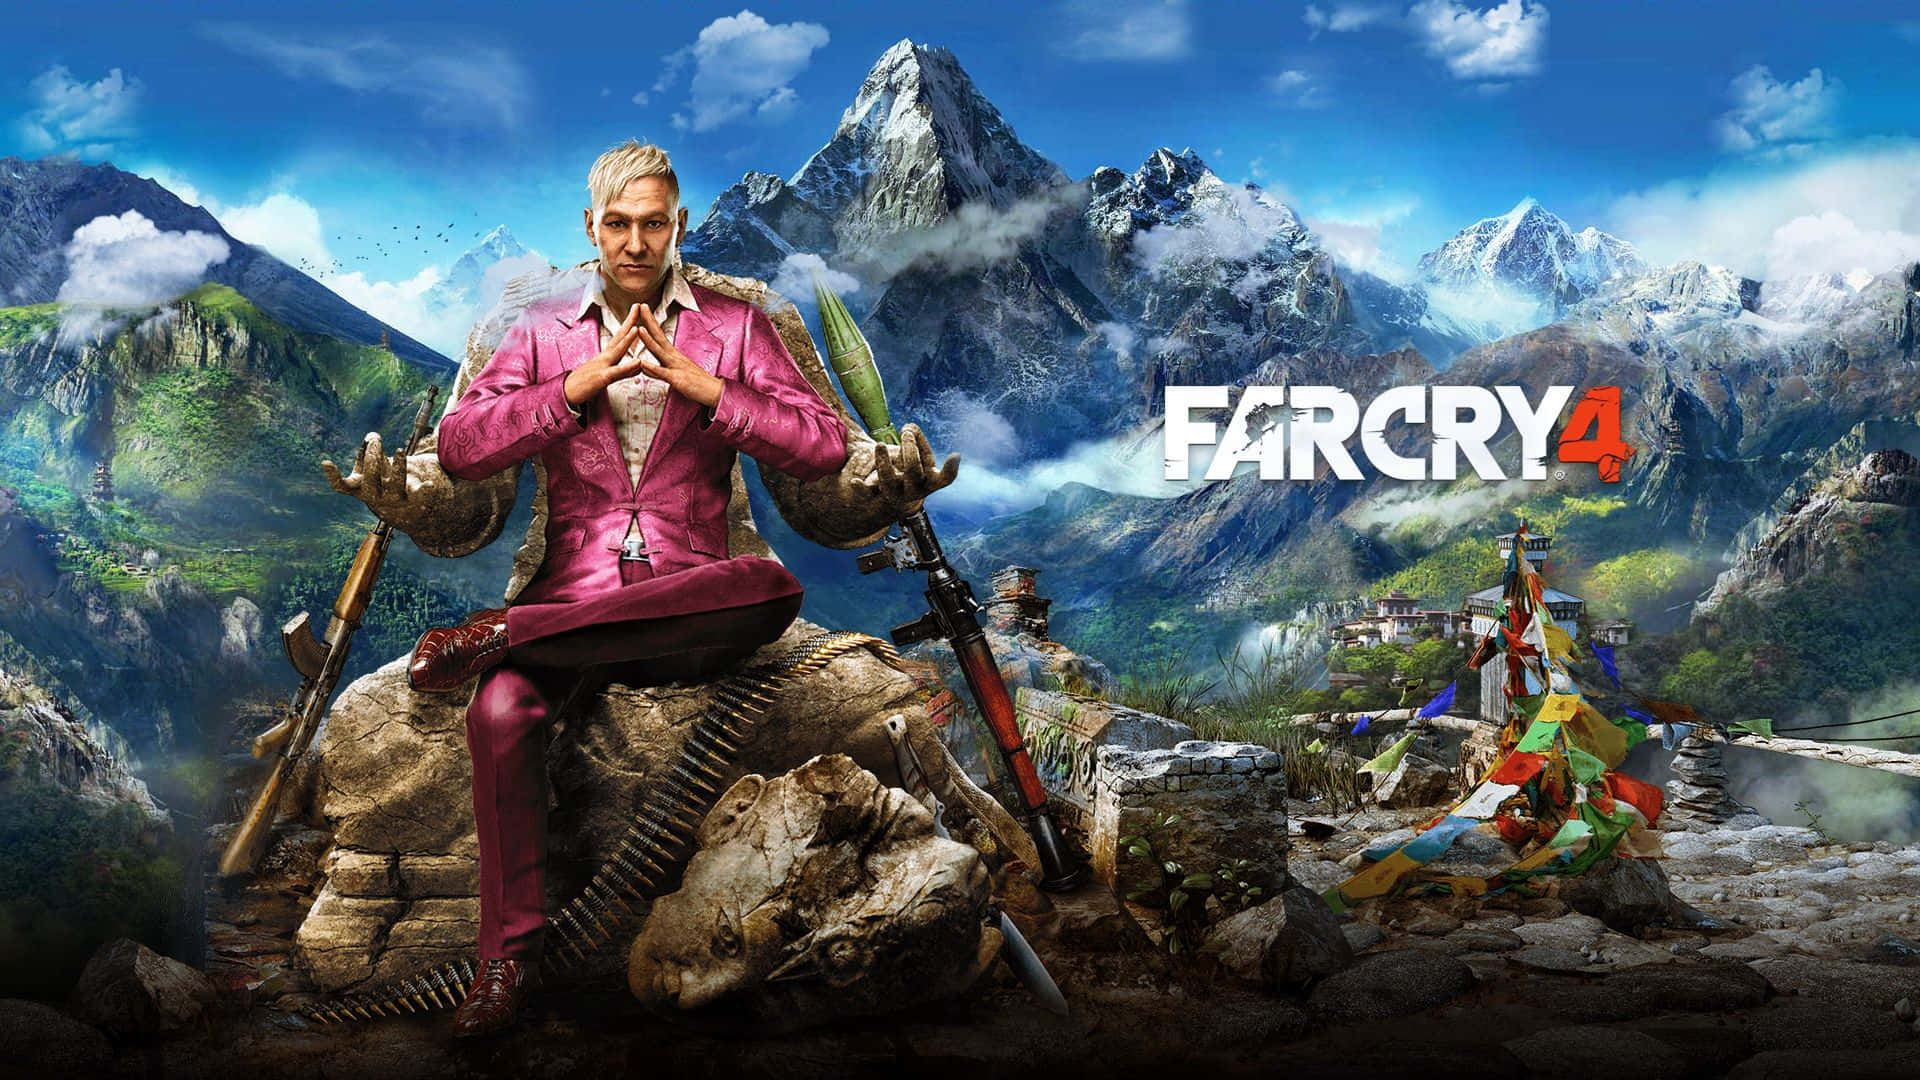 Mobile wallpaper: Video Game, Far Cry, Far Cry 4, 1084406 download the  picture for free.